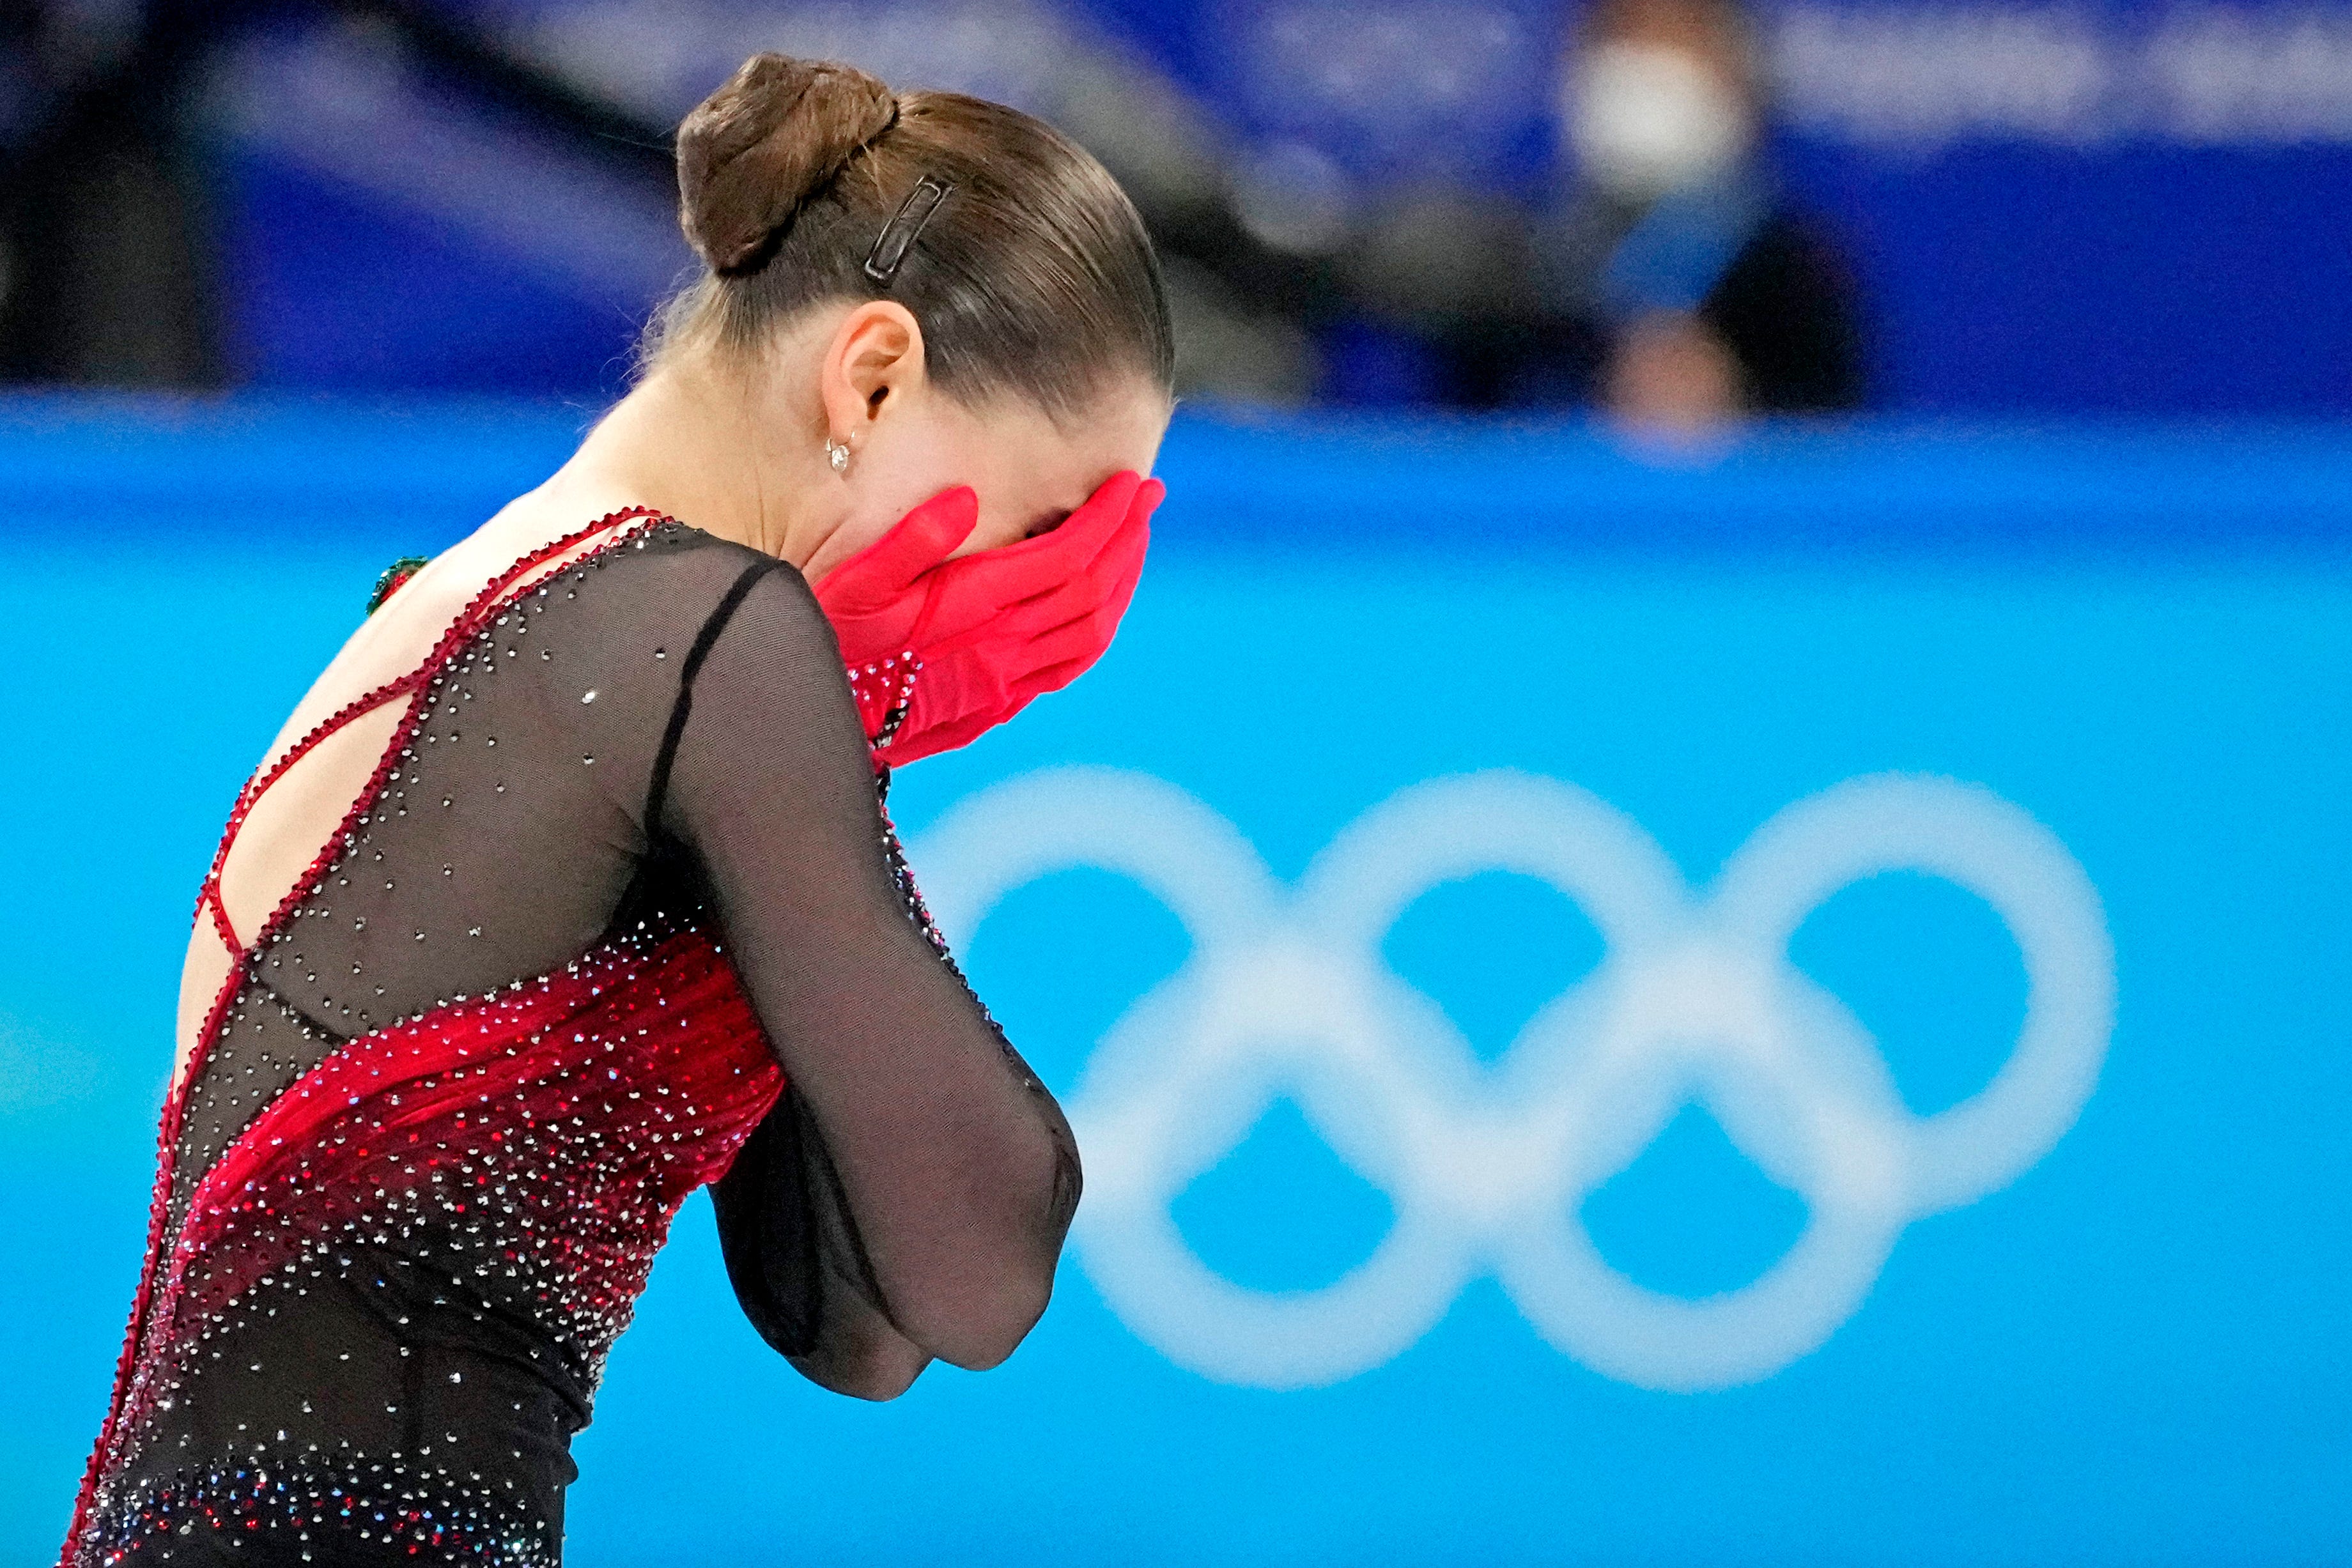 'I've never witnessed any sporting event quite like this': Watching Kamila Valieva skate was agonizing TV | Opinion thumbnail